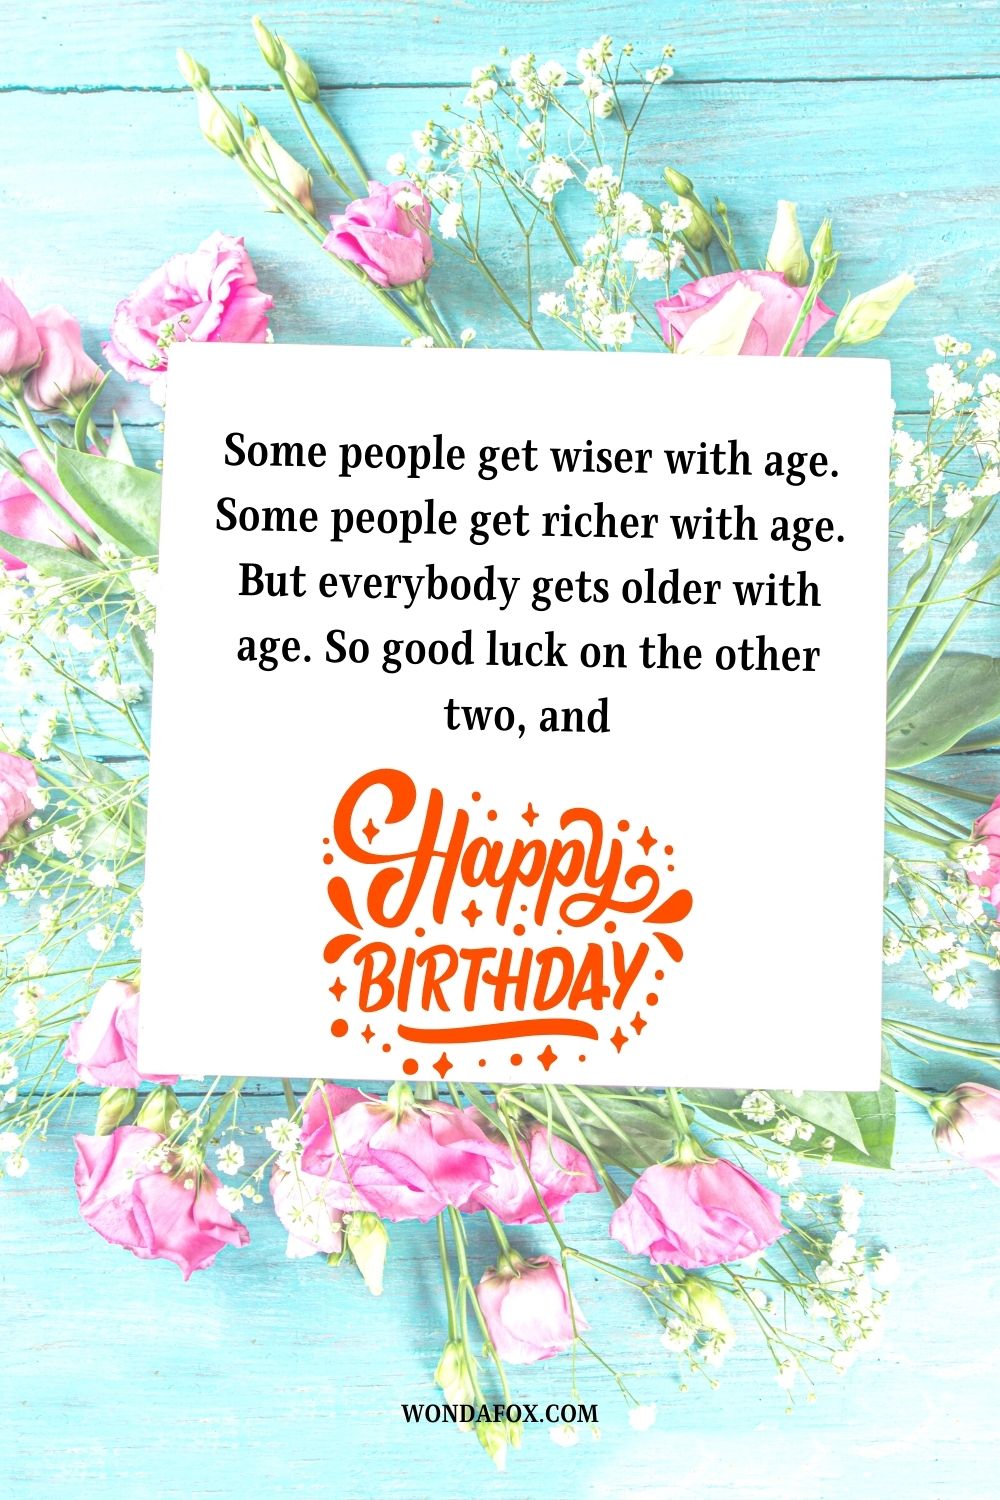 Some people get wiser with age. Some people get richer with age. But everybody gets older with age. So good luck on the other two, and happy birthday!